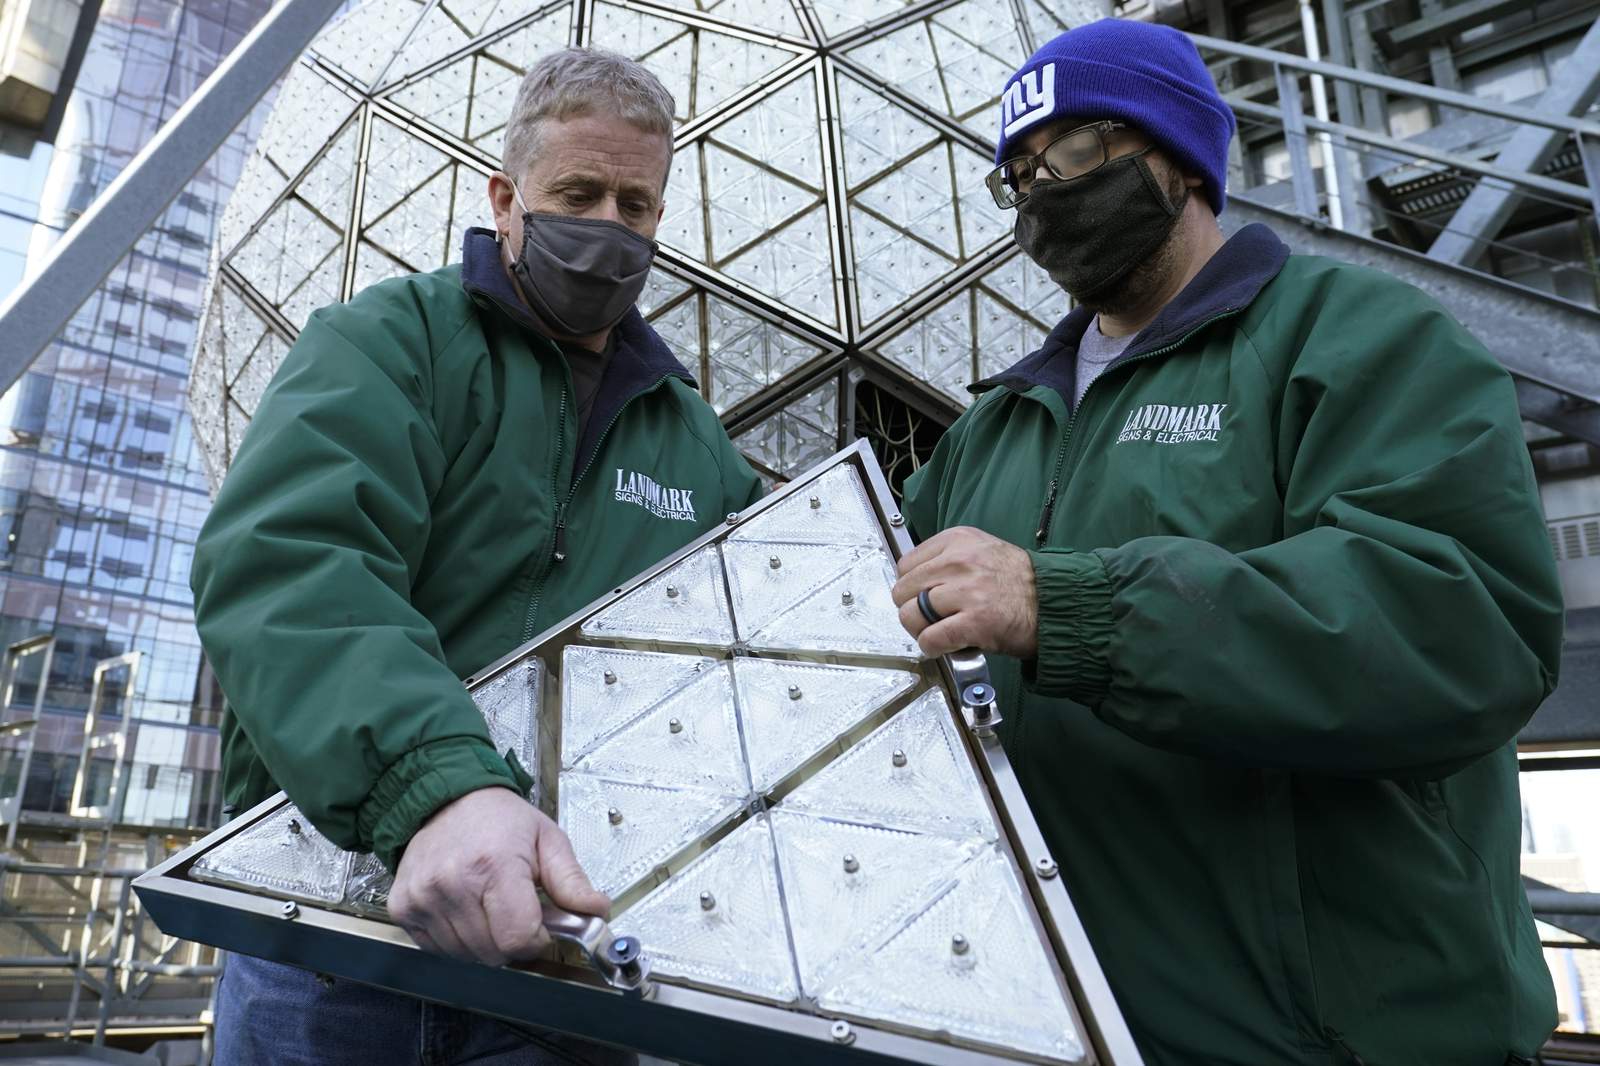 Workers install 192 crystals on Times Square New Year's ball